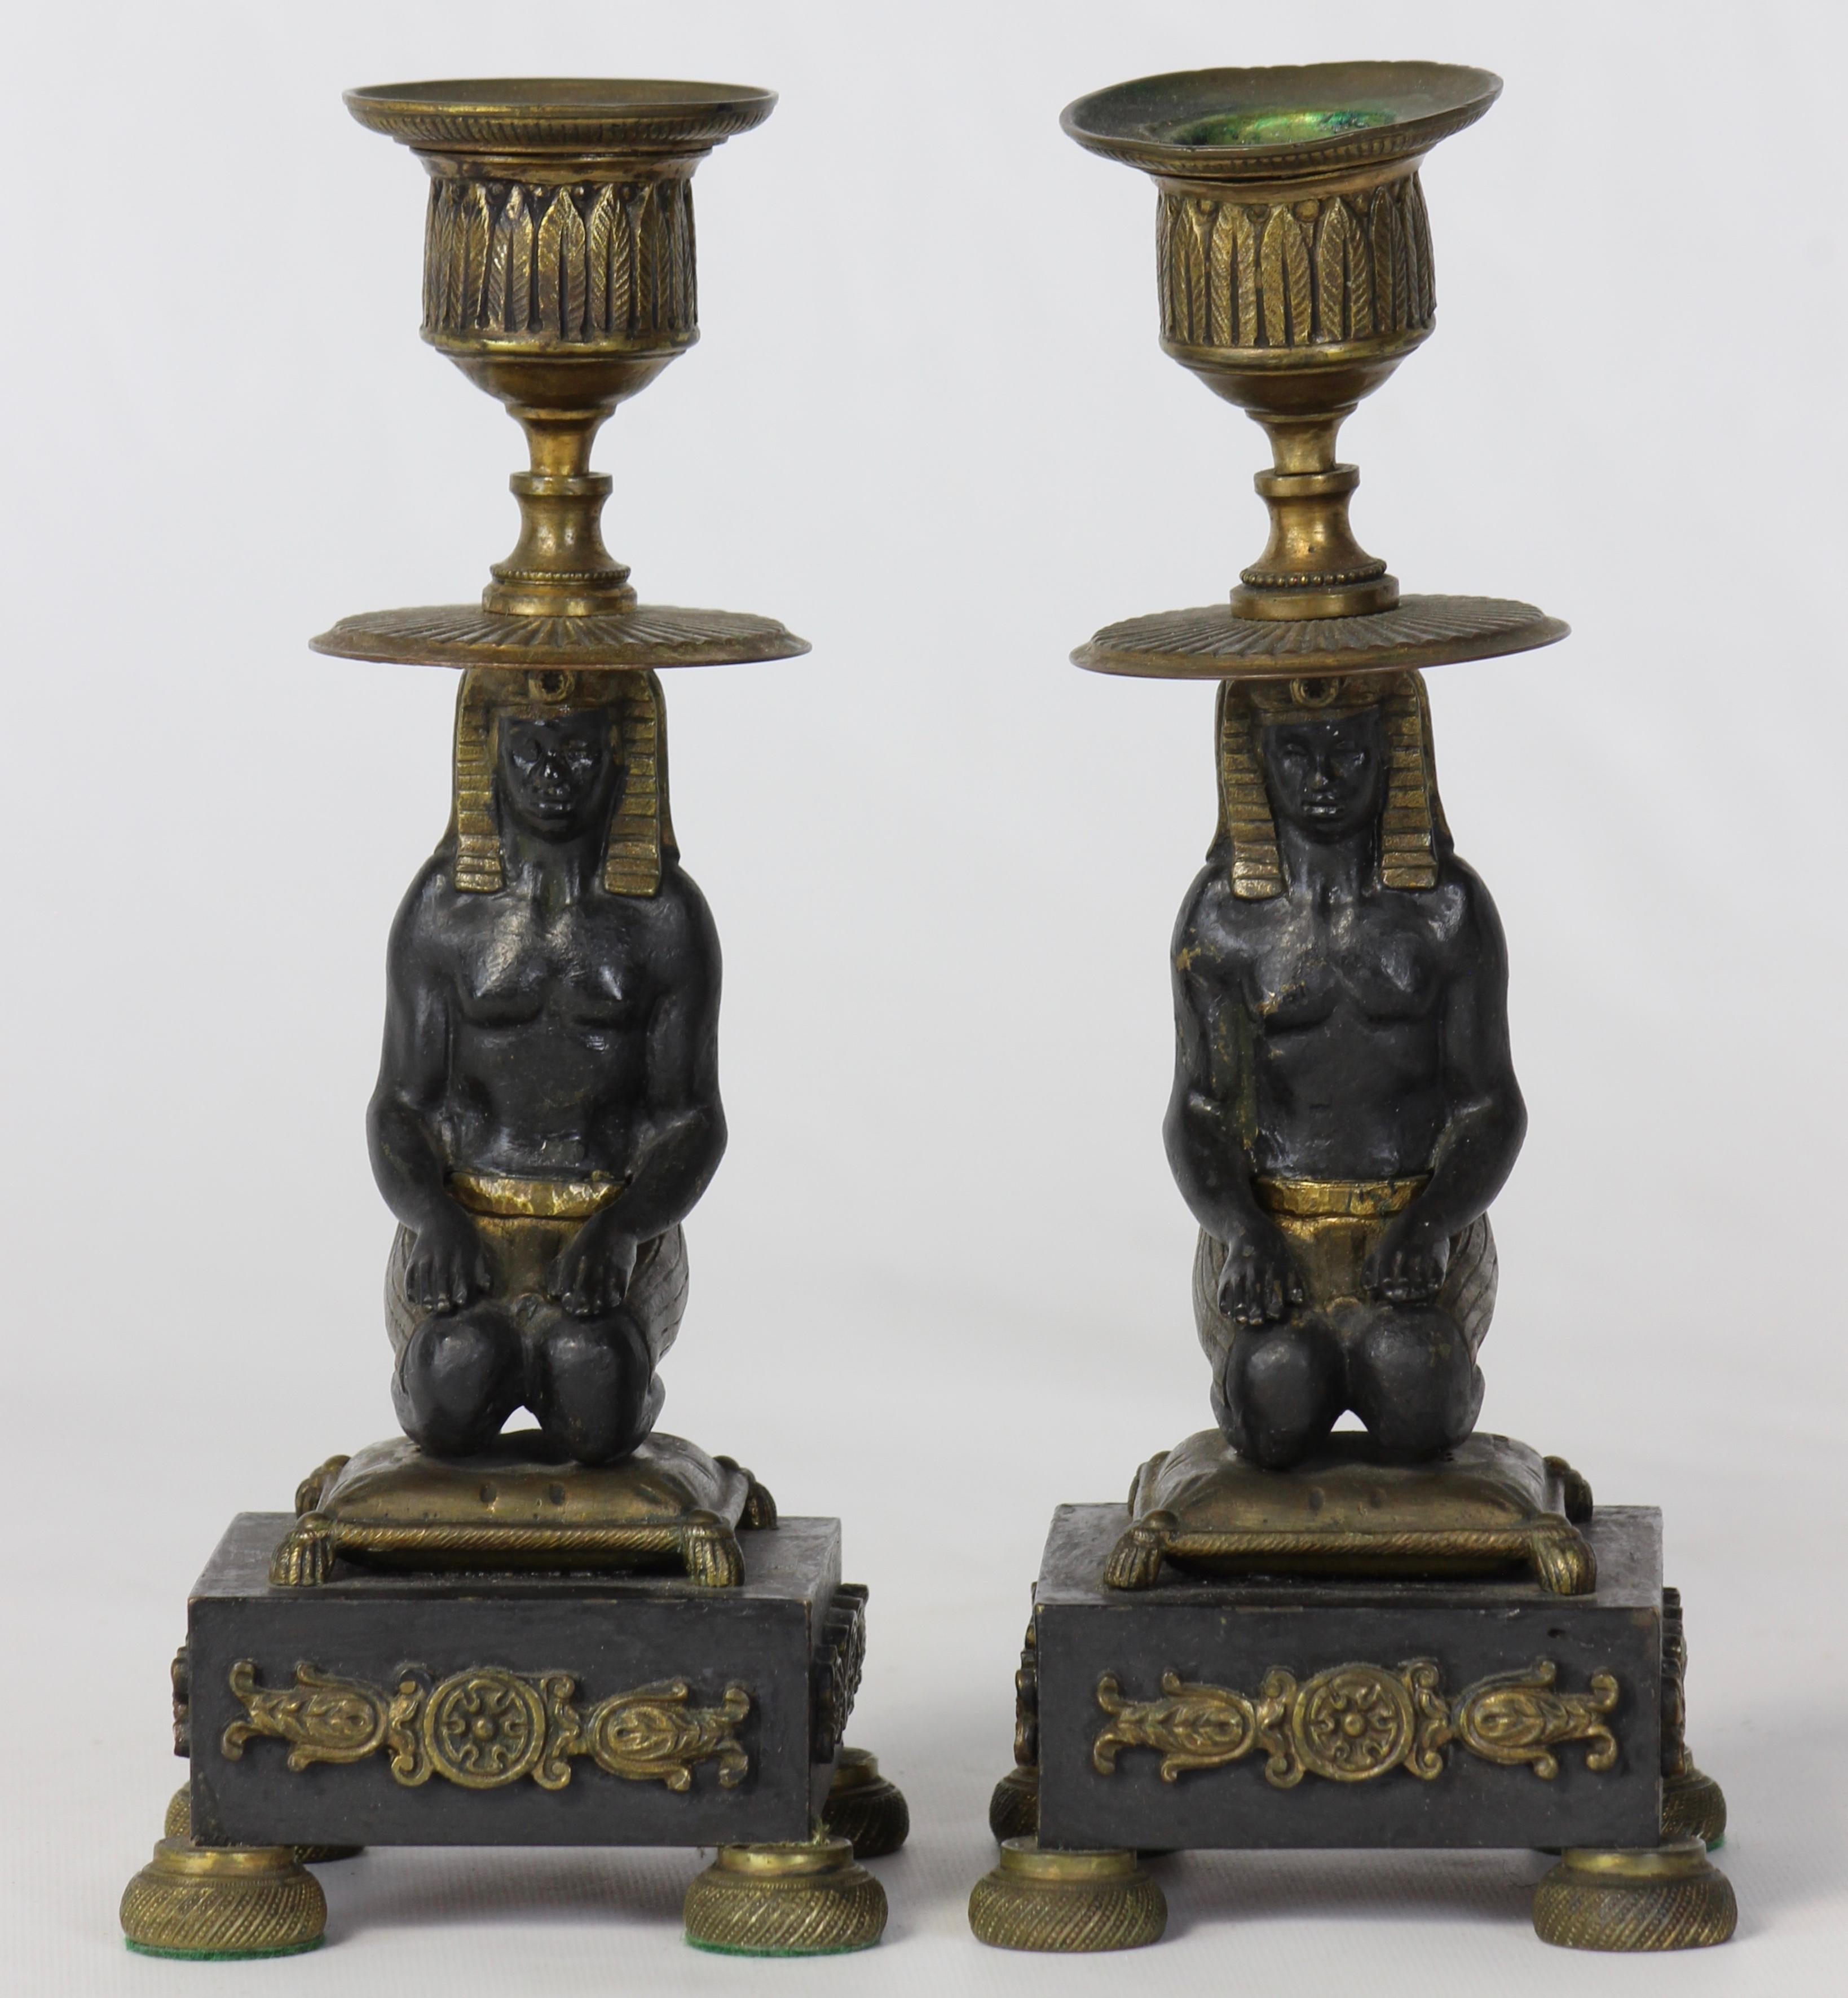 A pair of early 19th century French bronze figural Egyptian revival candlesticks depicting kneeling pharaohs on cushions.